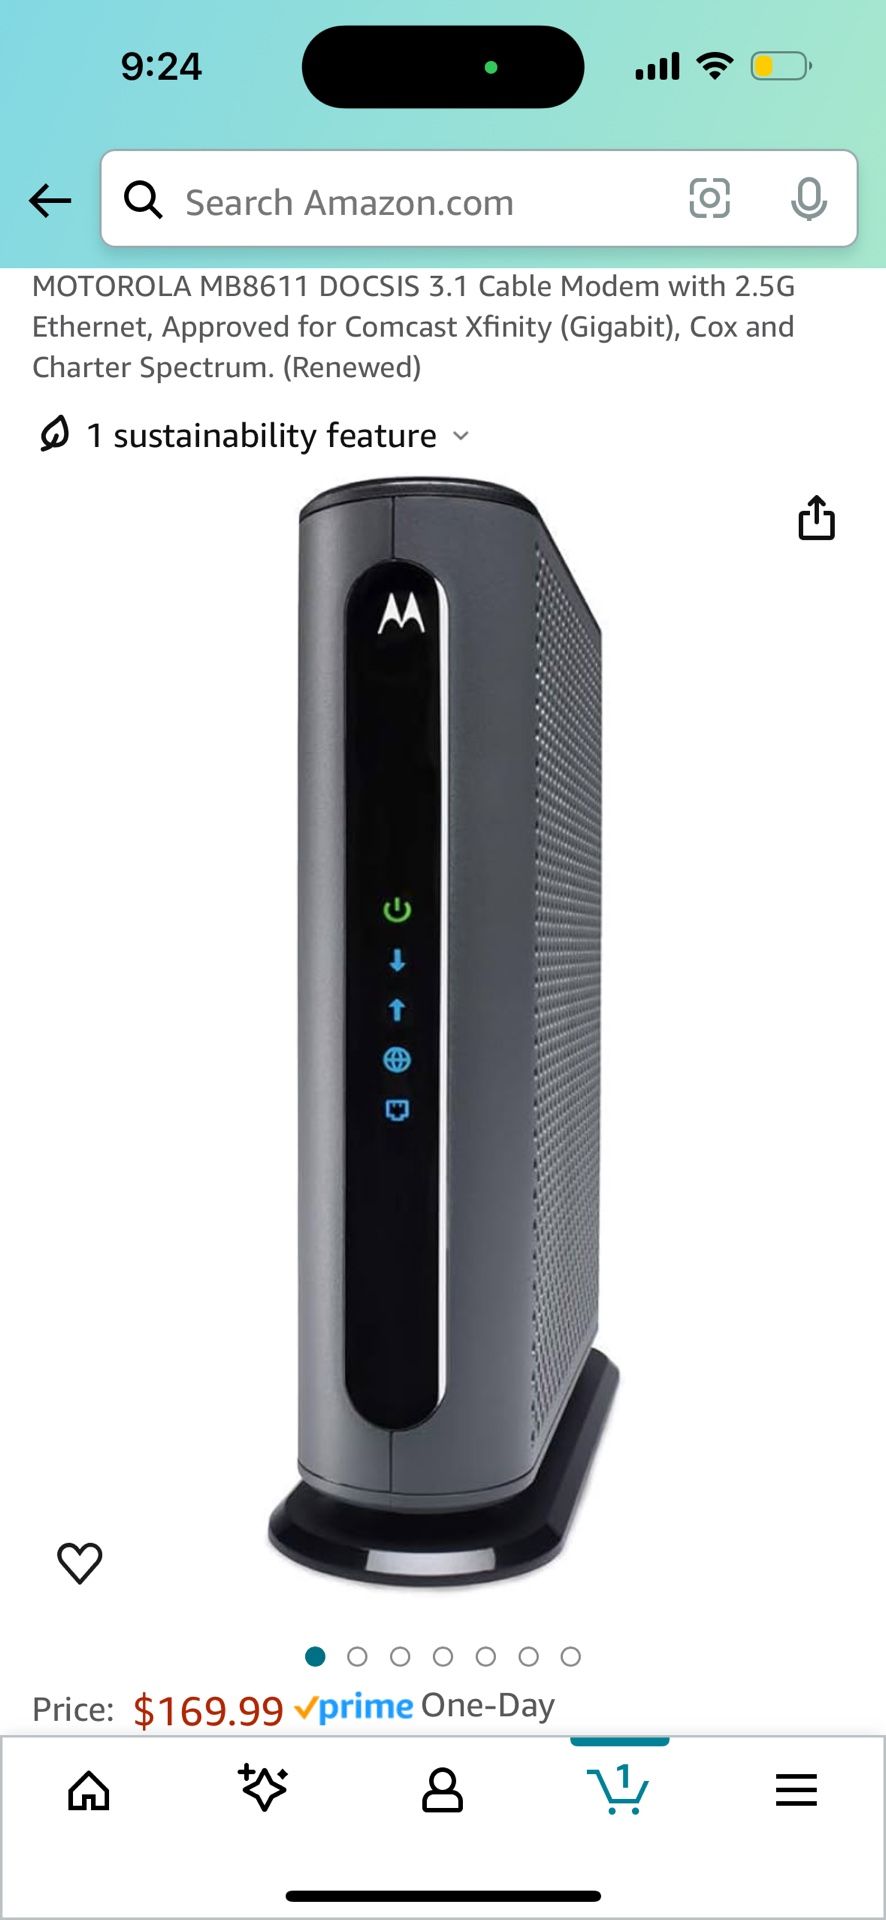 Brand New MOTOROLA MB8611 DOCSIS 3.1 Cable Modem with 2.5G Ethernet, Approved for Comcast Xfinity (Gigabit), Cox and Charter Spectrum